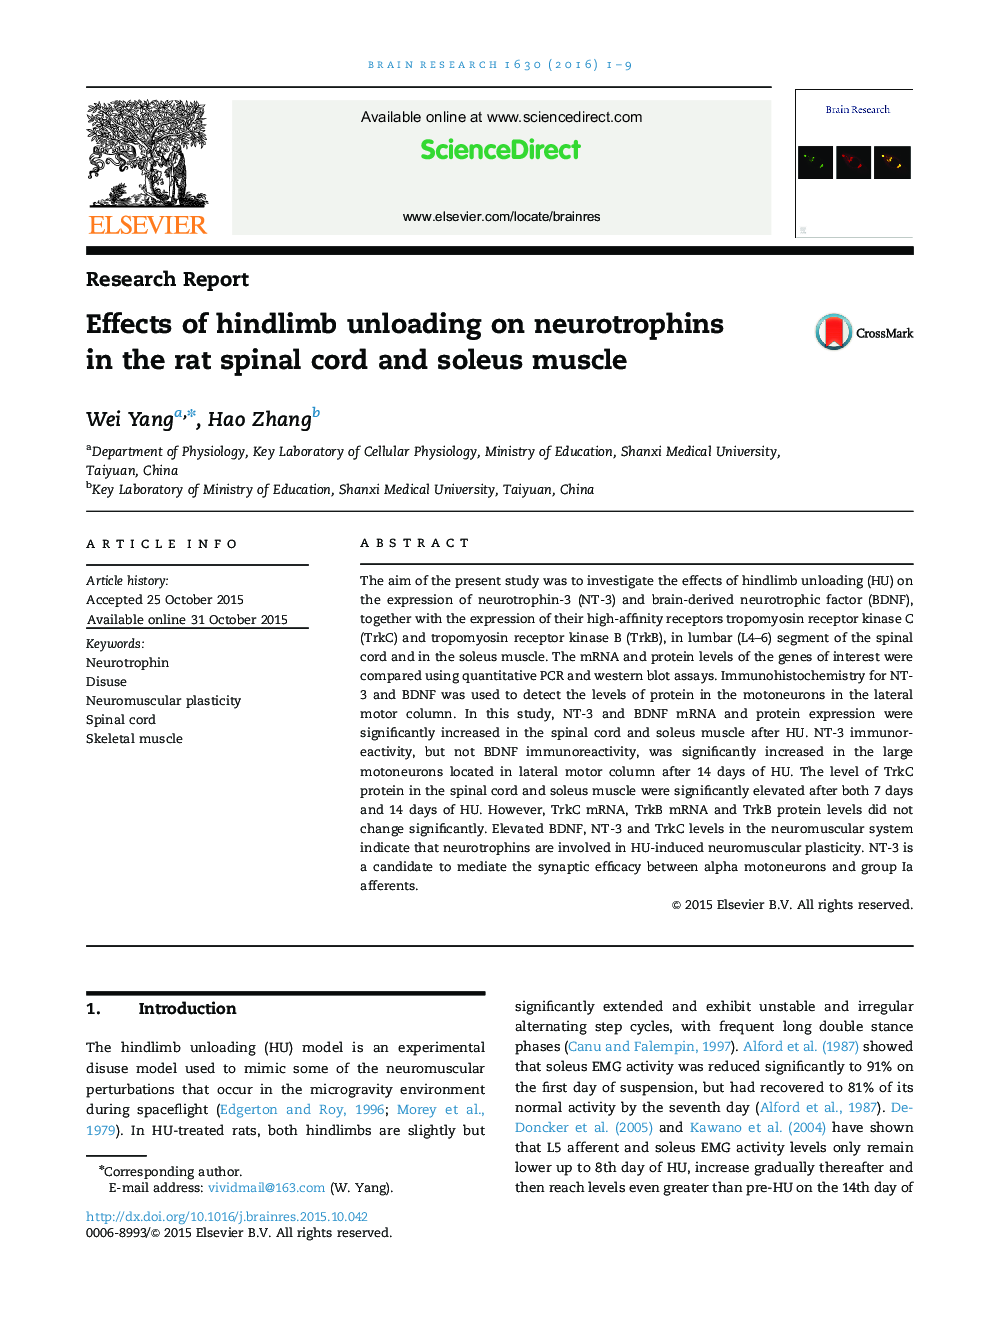 Research ReportEffects of hindlimb unloading on neurotrophins in the rat spinal cord and soleus muscle